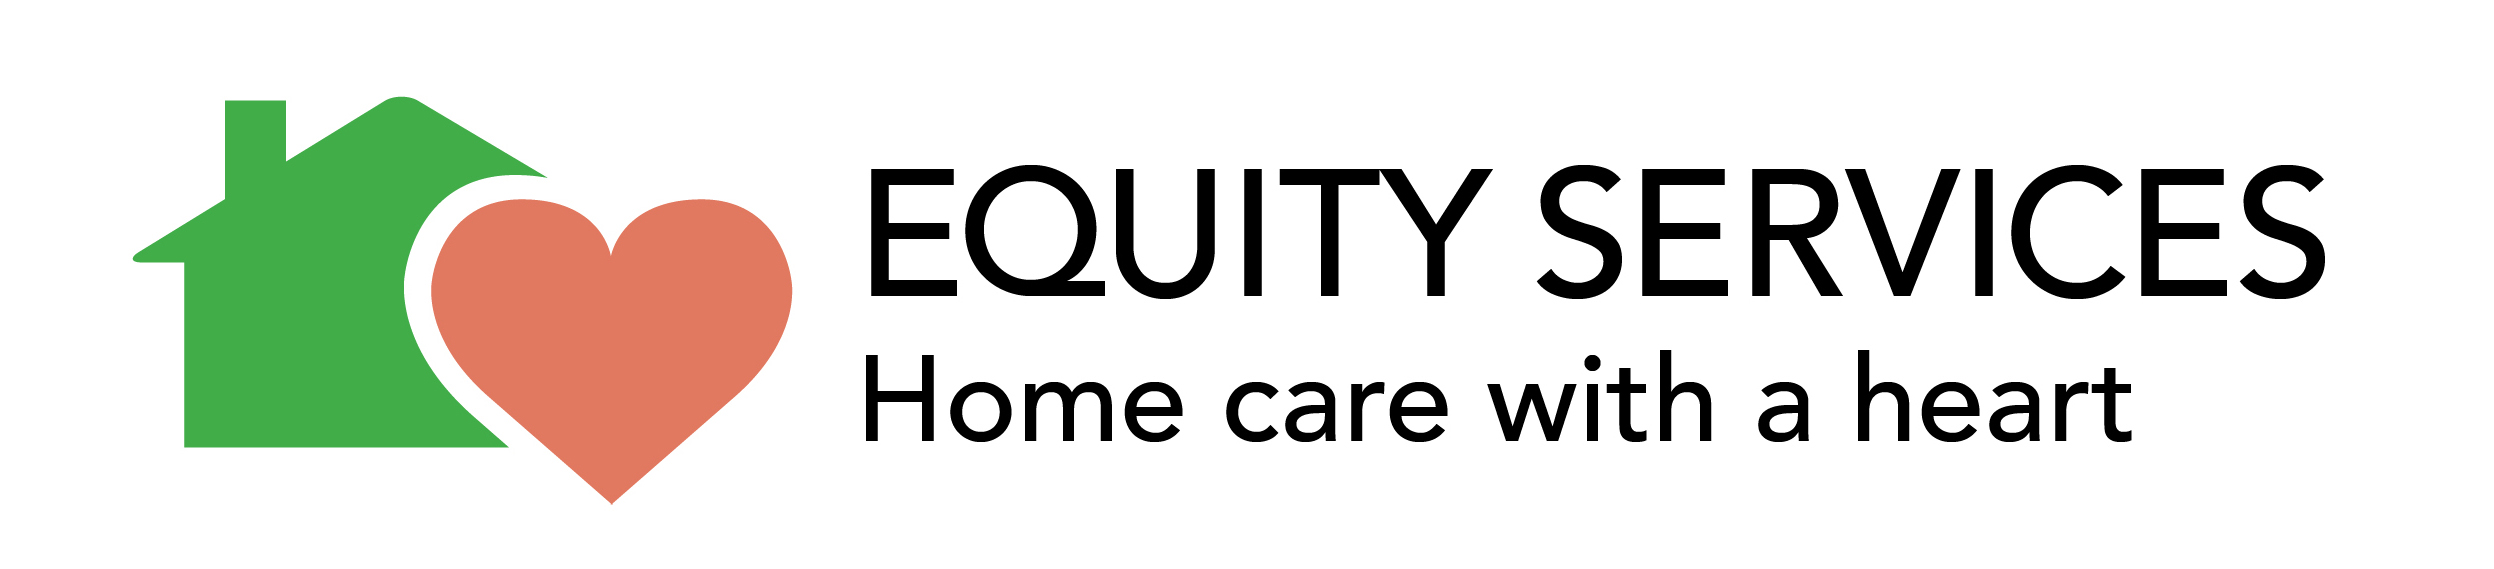 Equity Services logo